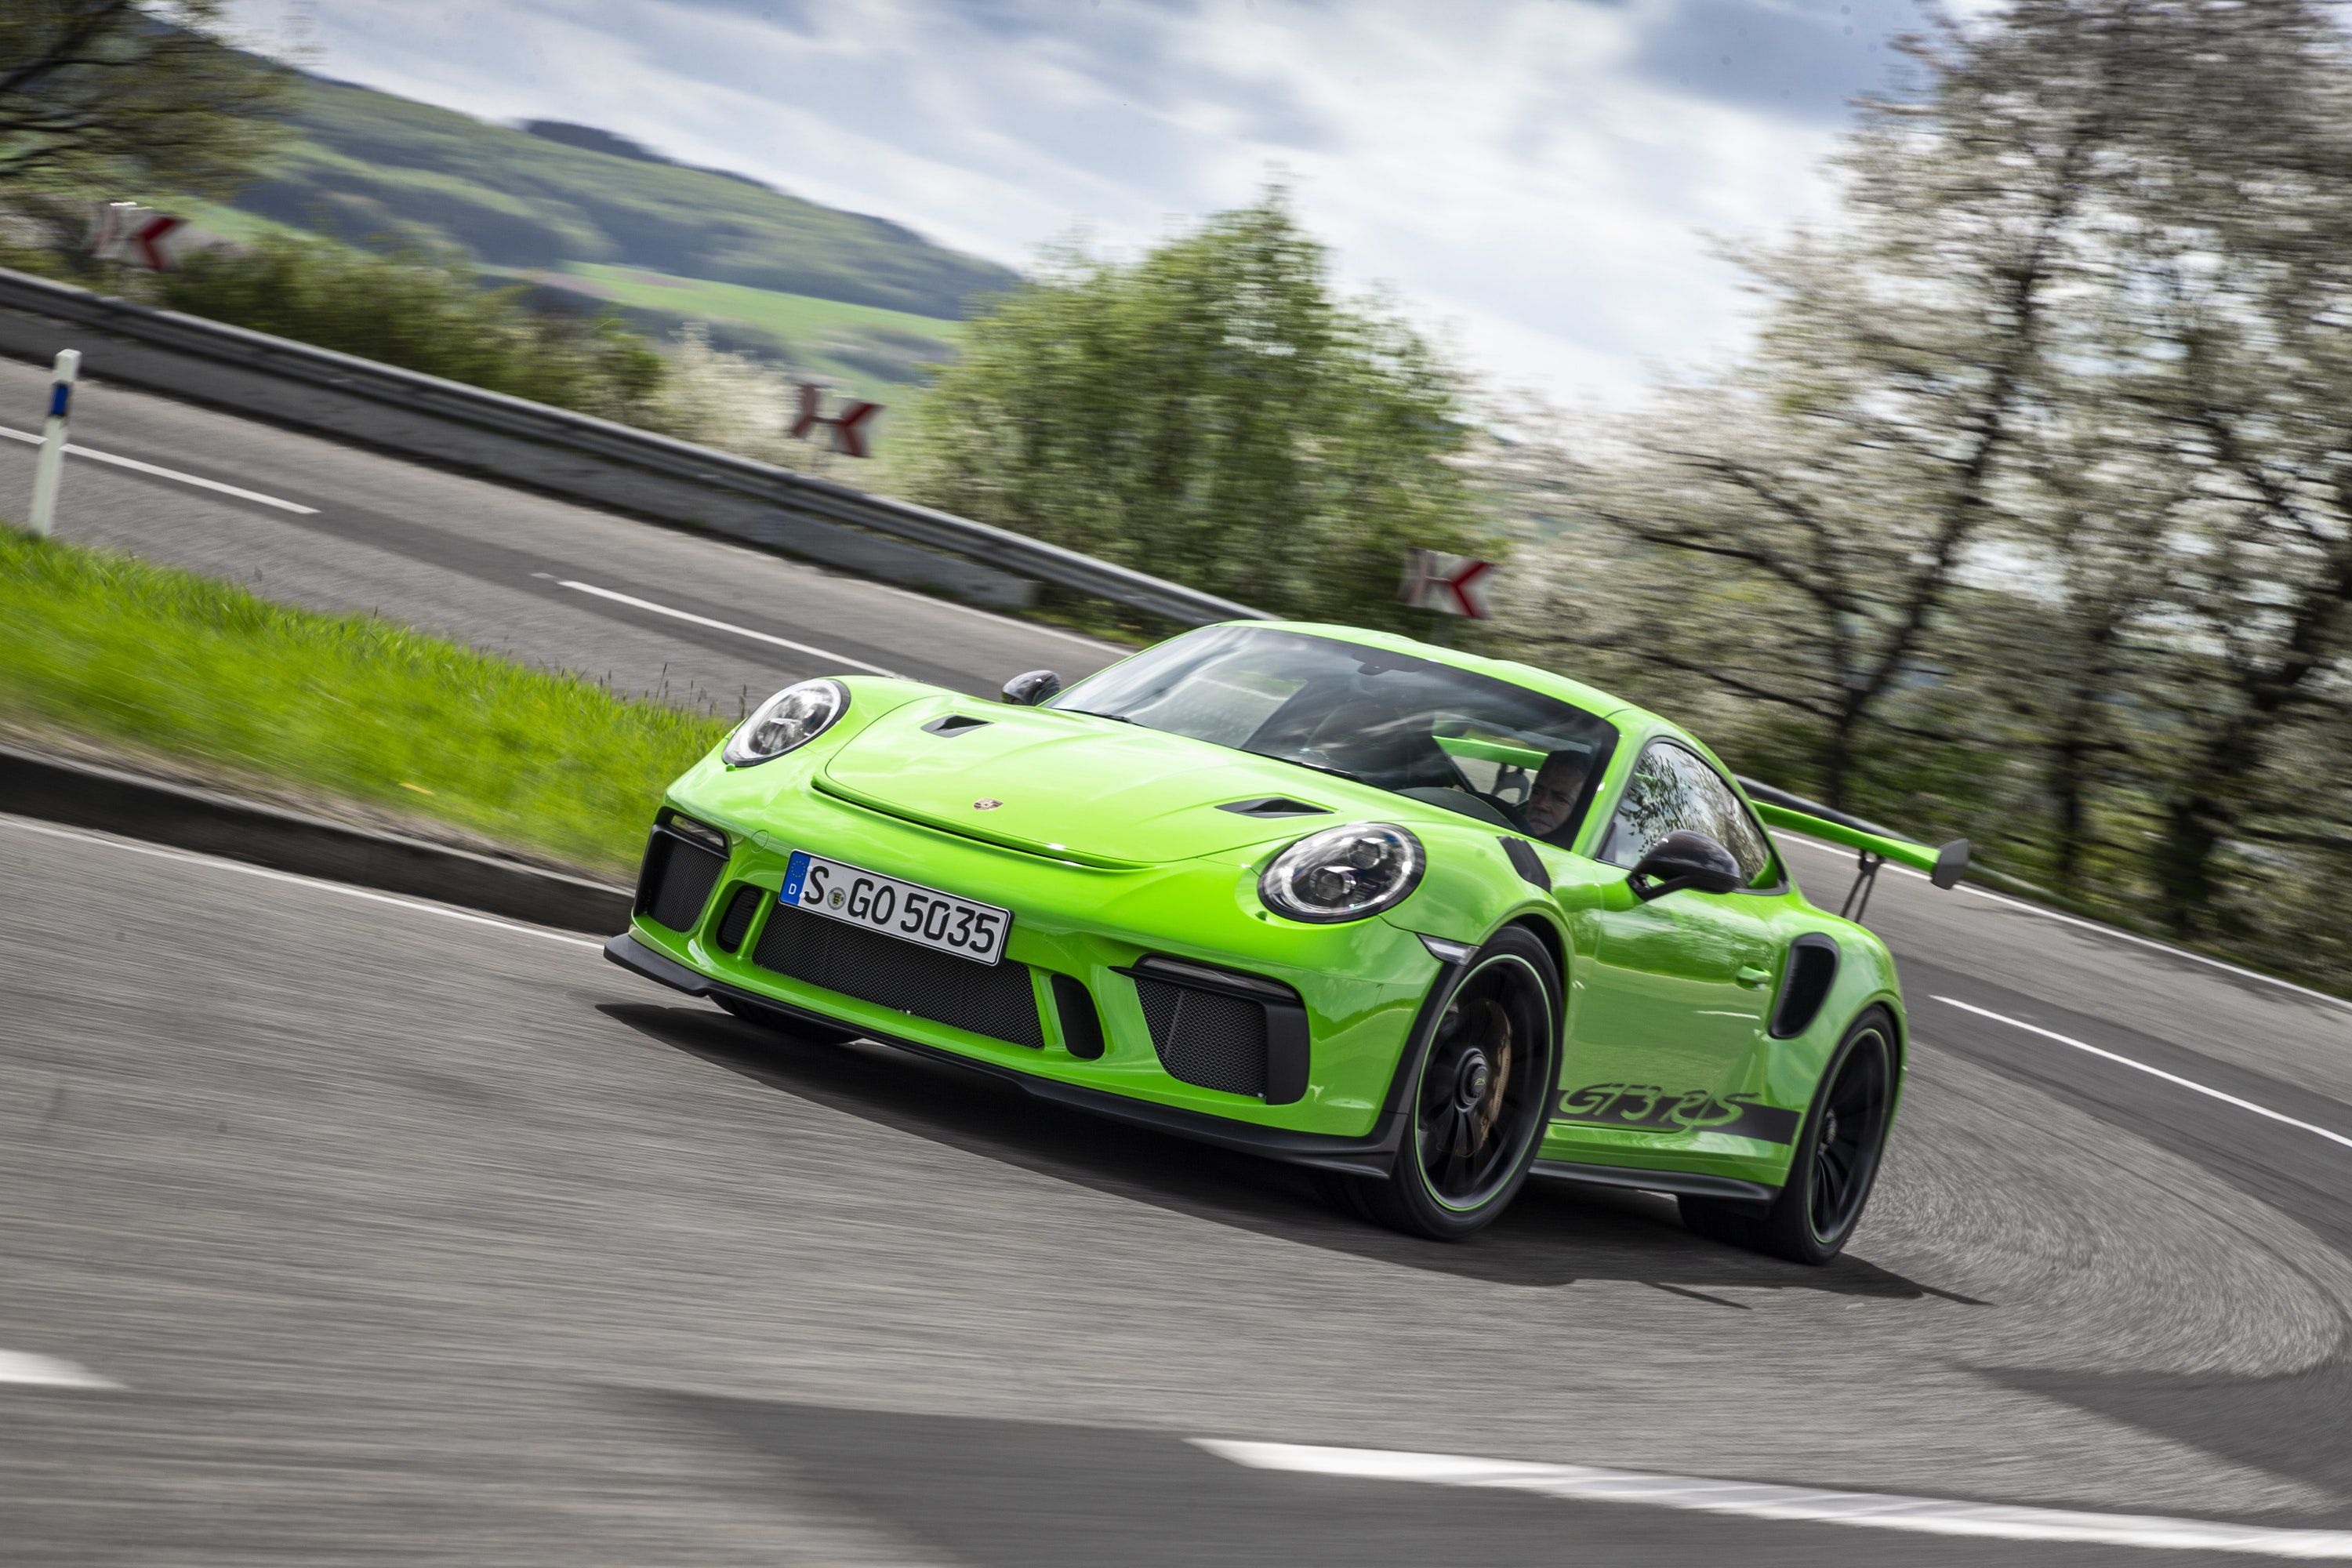 Front view of a green Porsche 911 GT3RS driving on a road